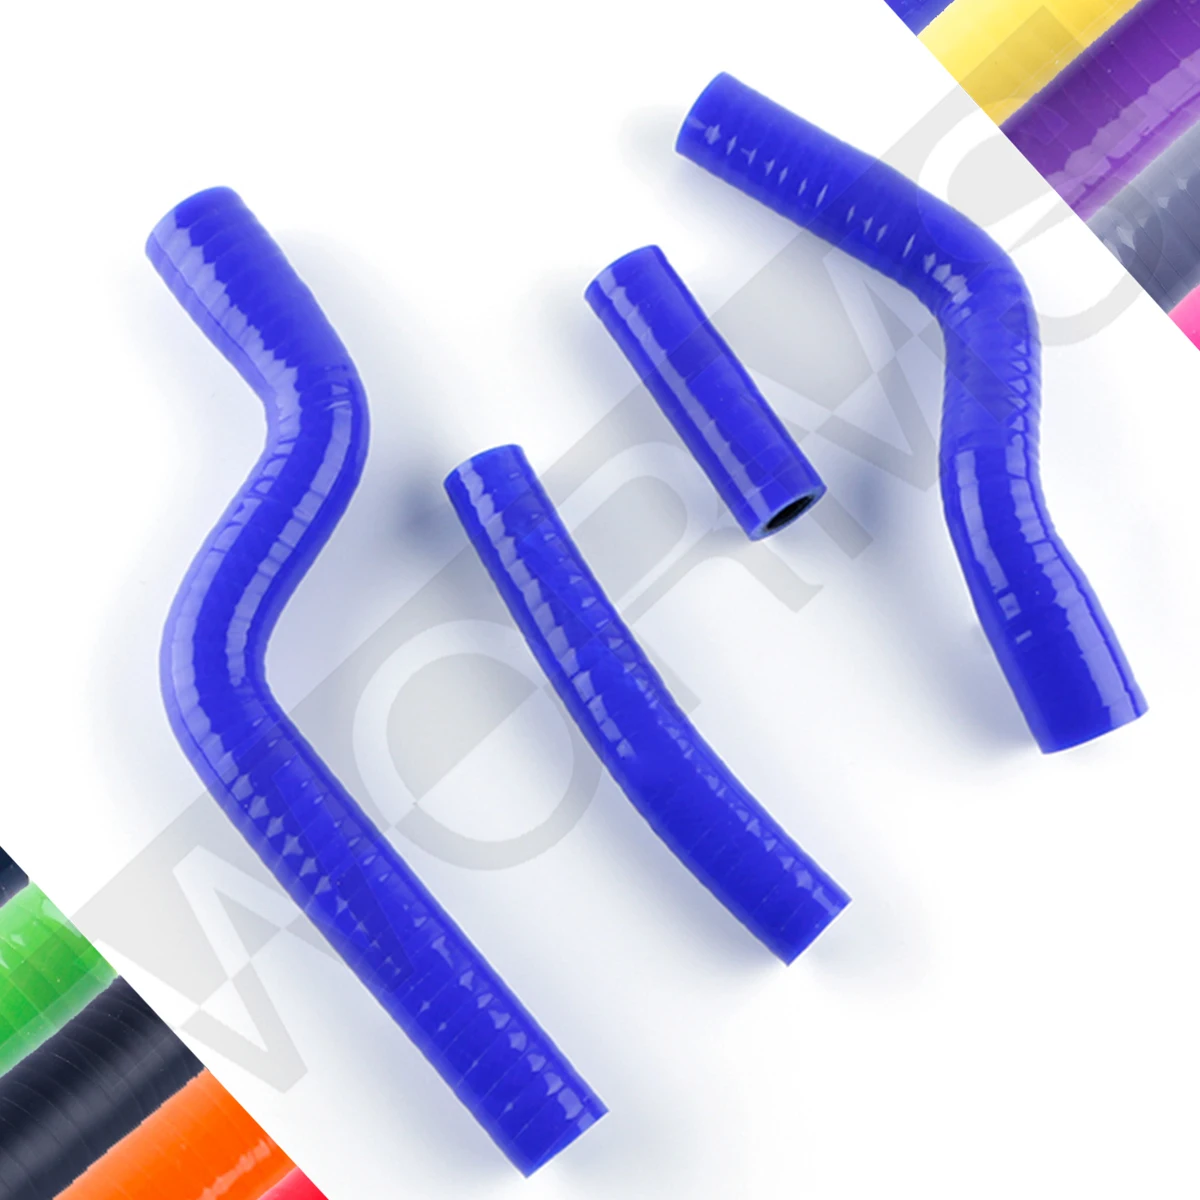 JFG RACING Motorcycle Radiator Coolant Silicone Hose Pipe Kit For Y.a.m.a.ha YZF450 YZF-450 2014 2015 2016 2017-Blue 